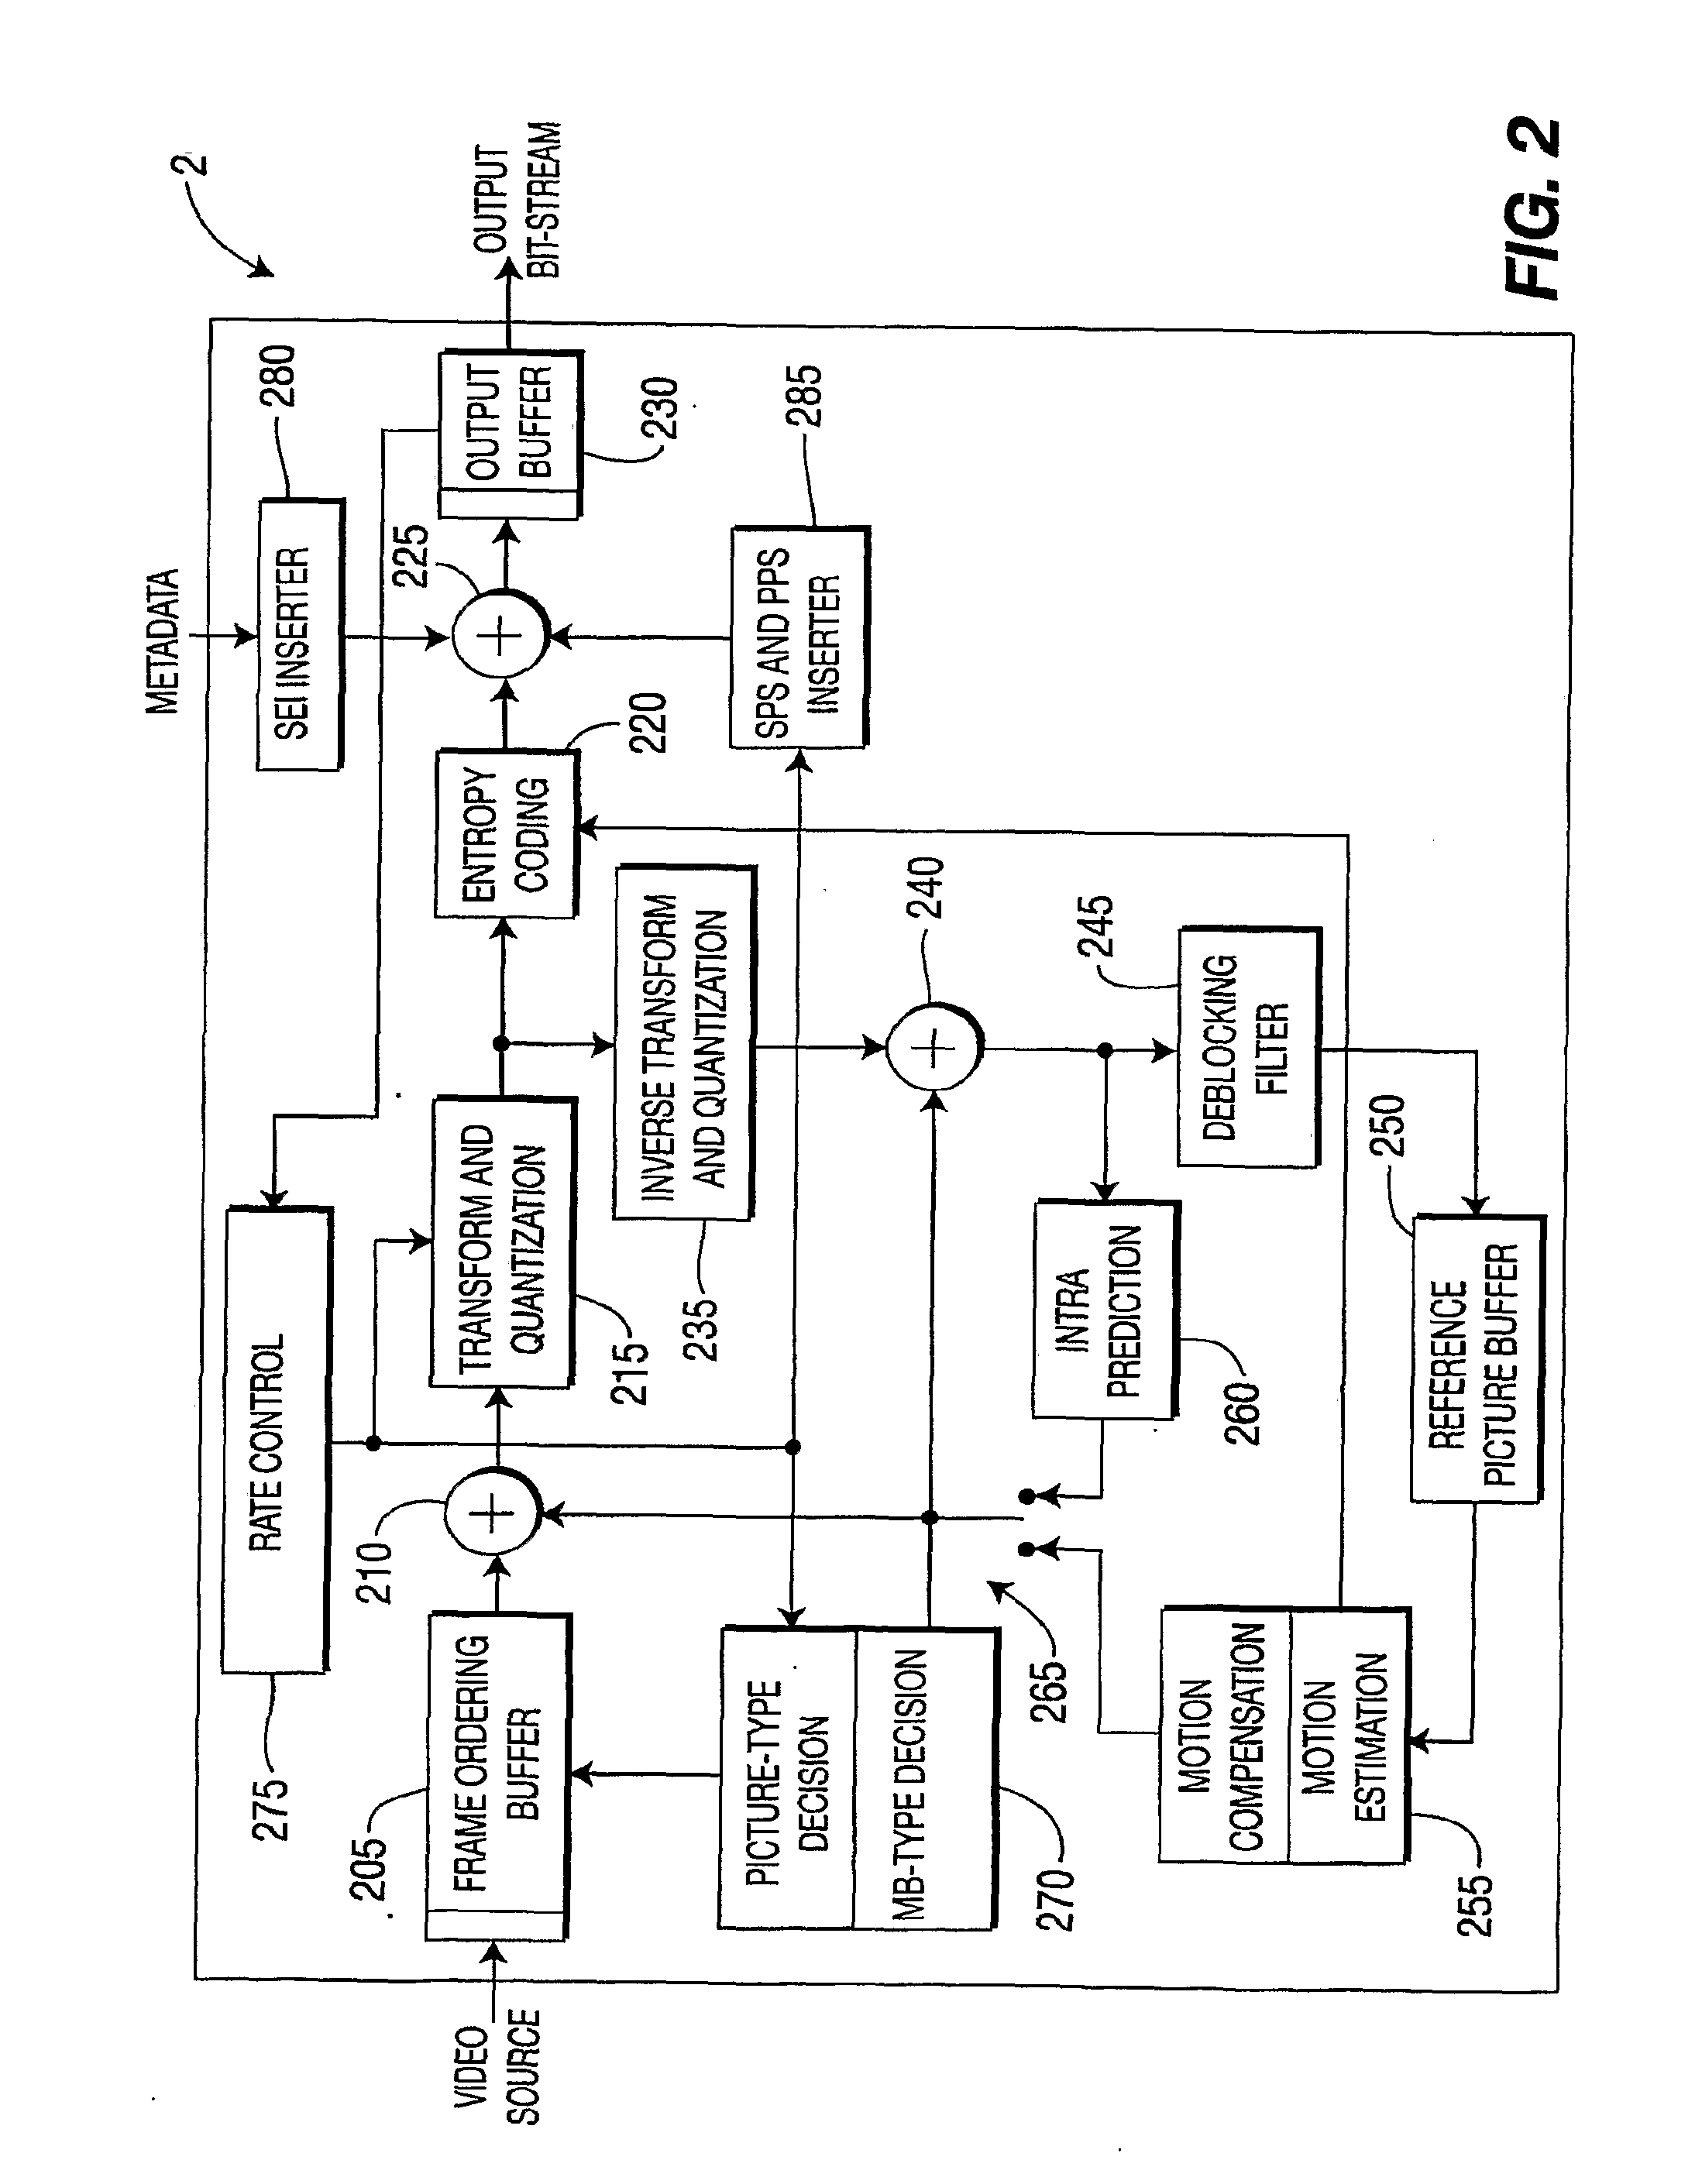 Methods and apparatus for enhanced performance in a multi-pass video recorder